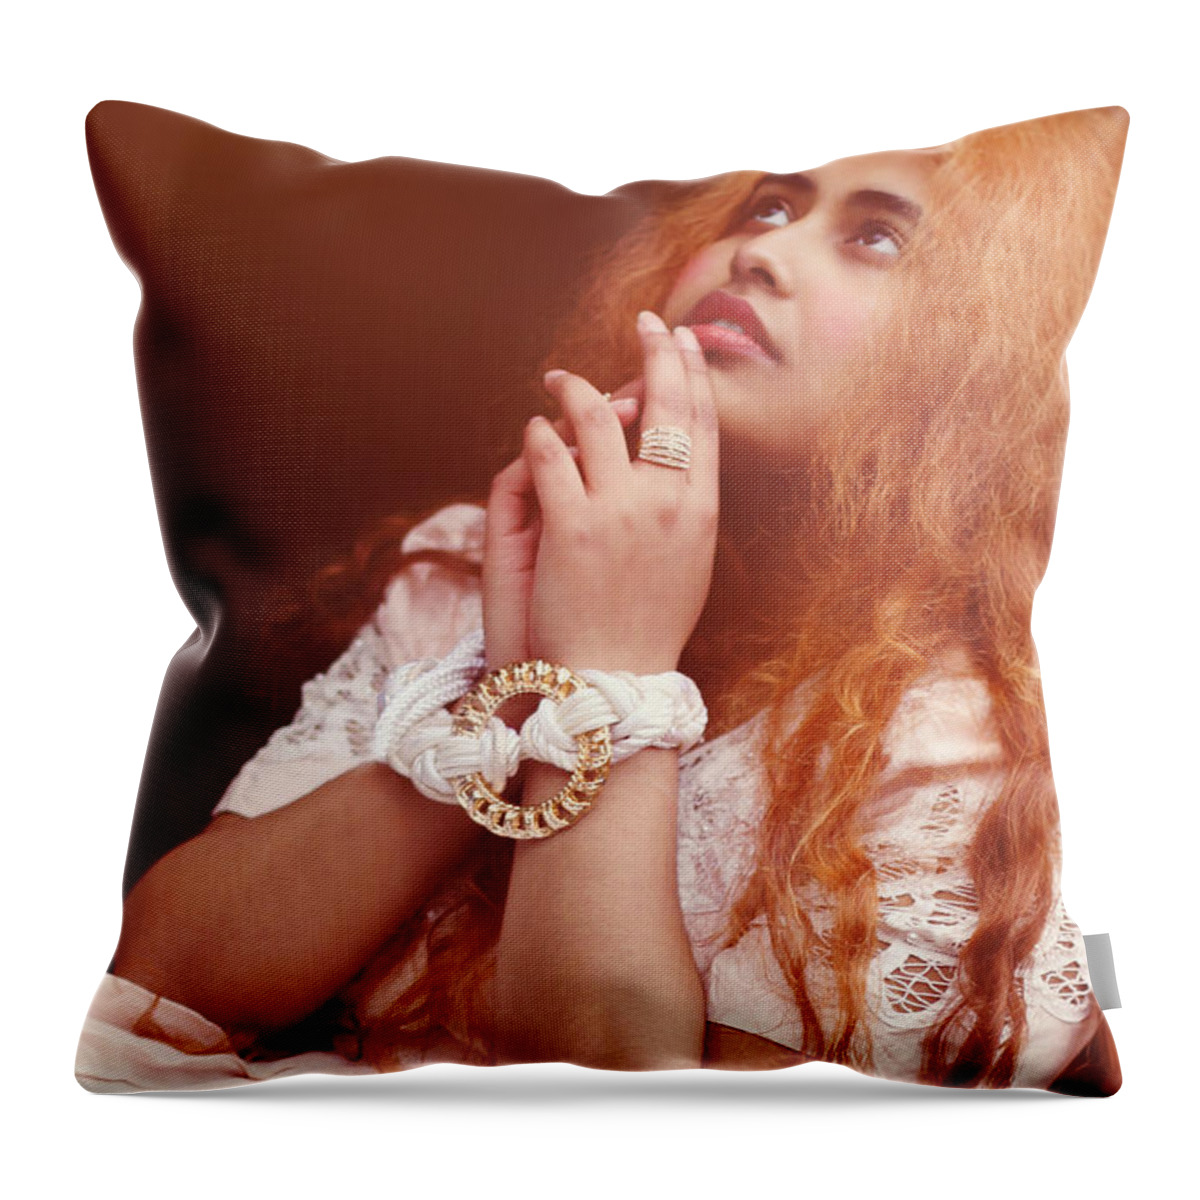 Girl Throw Pillow featuring the photograph Hope by Jasna Buncic